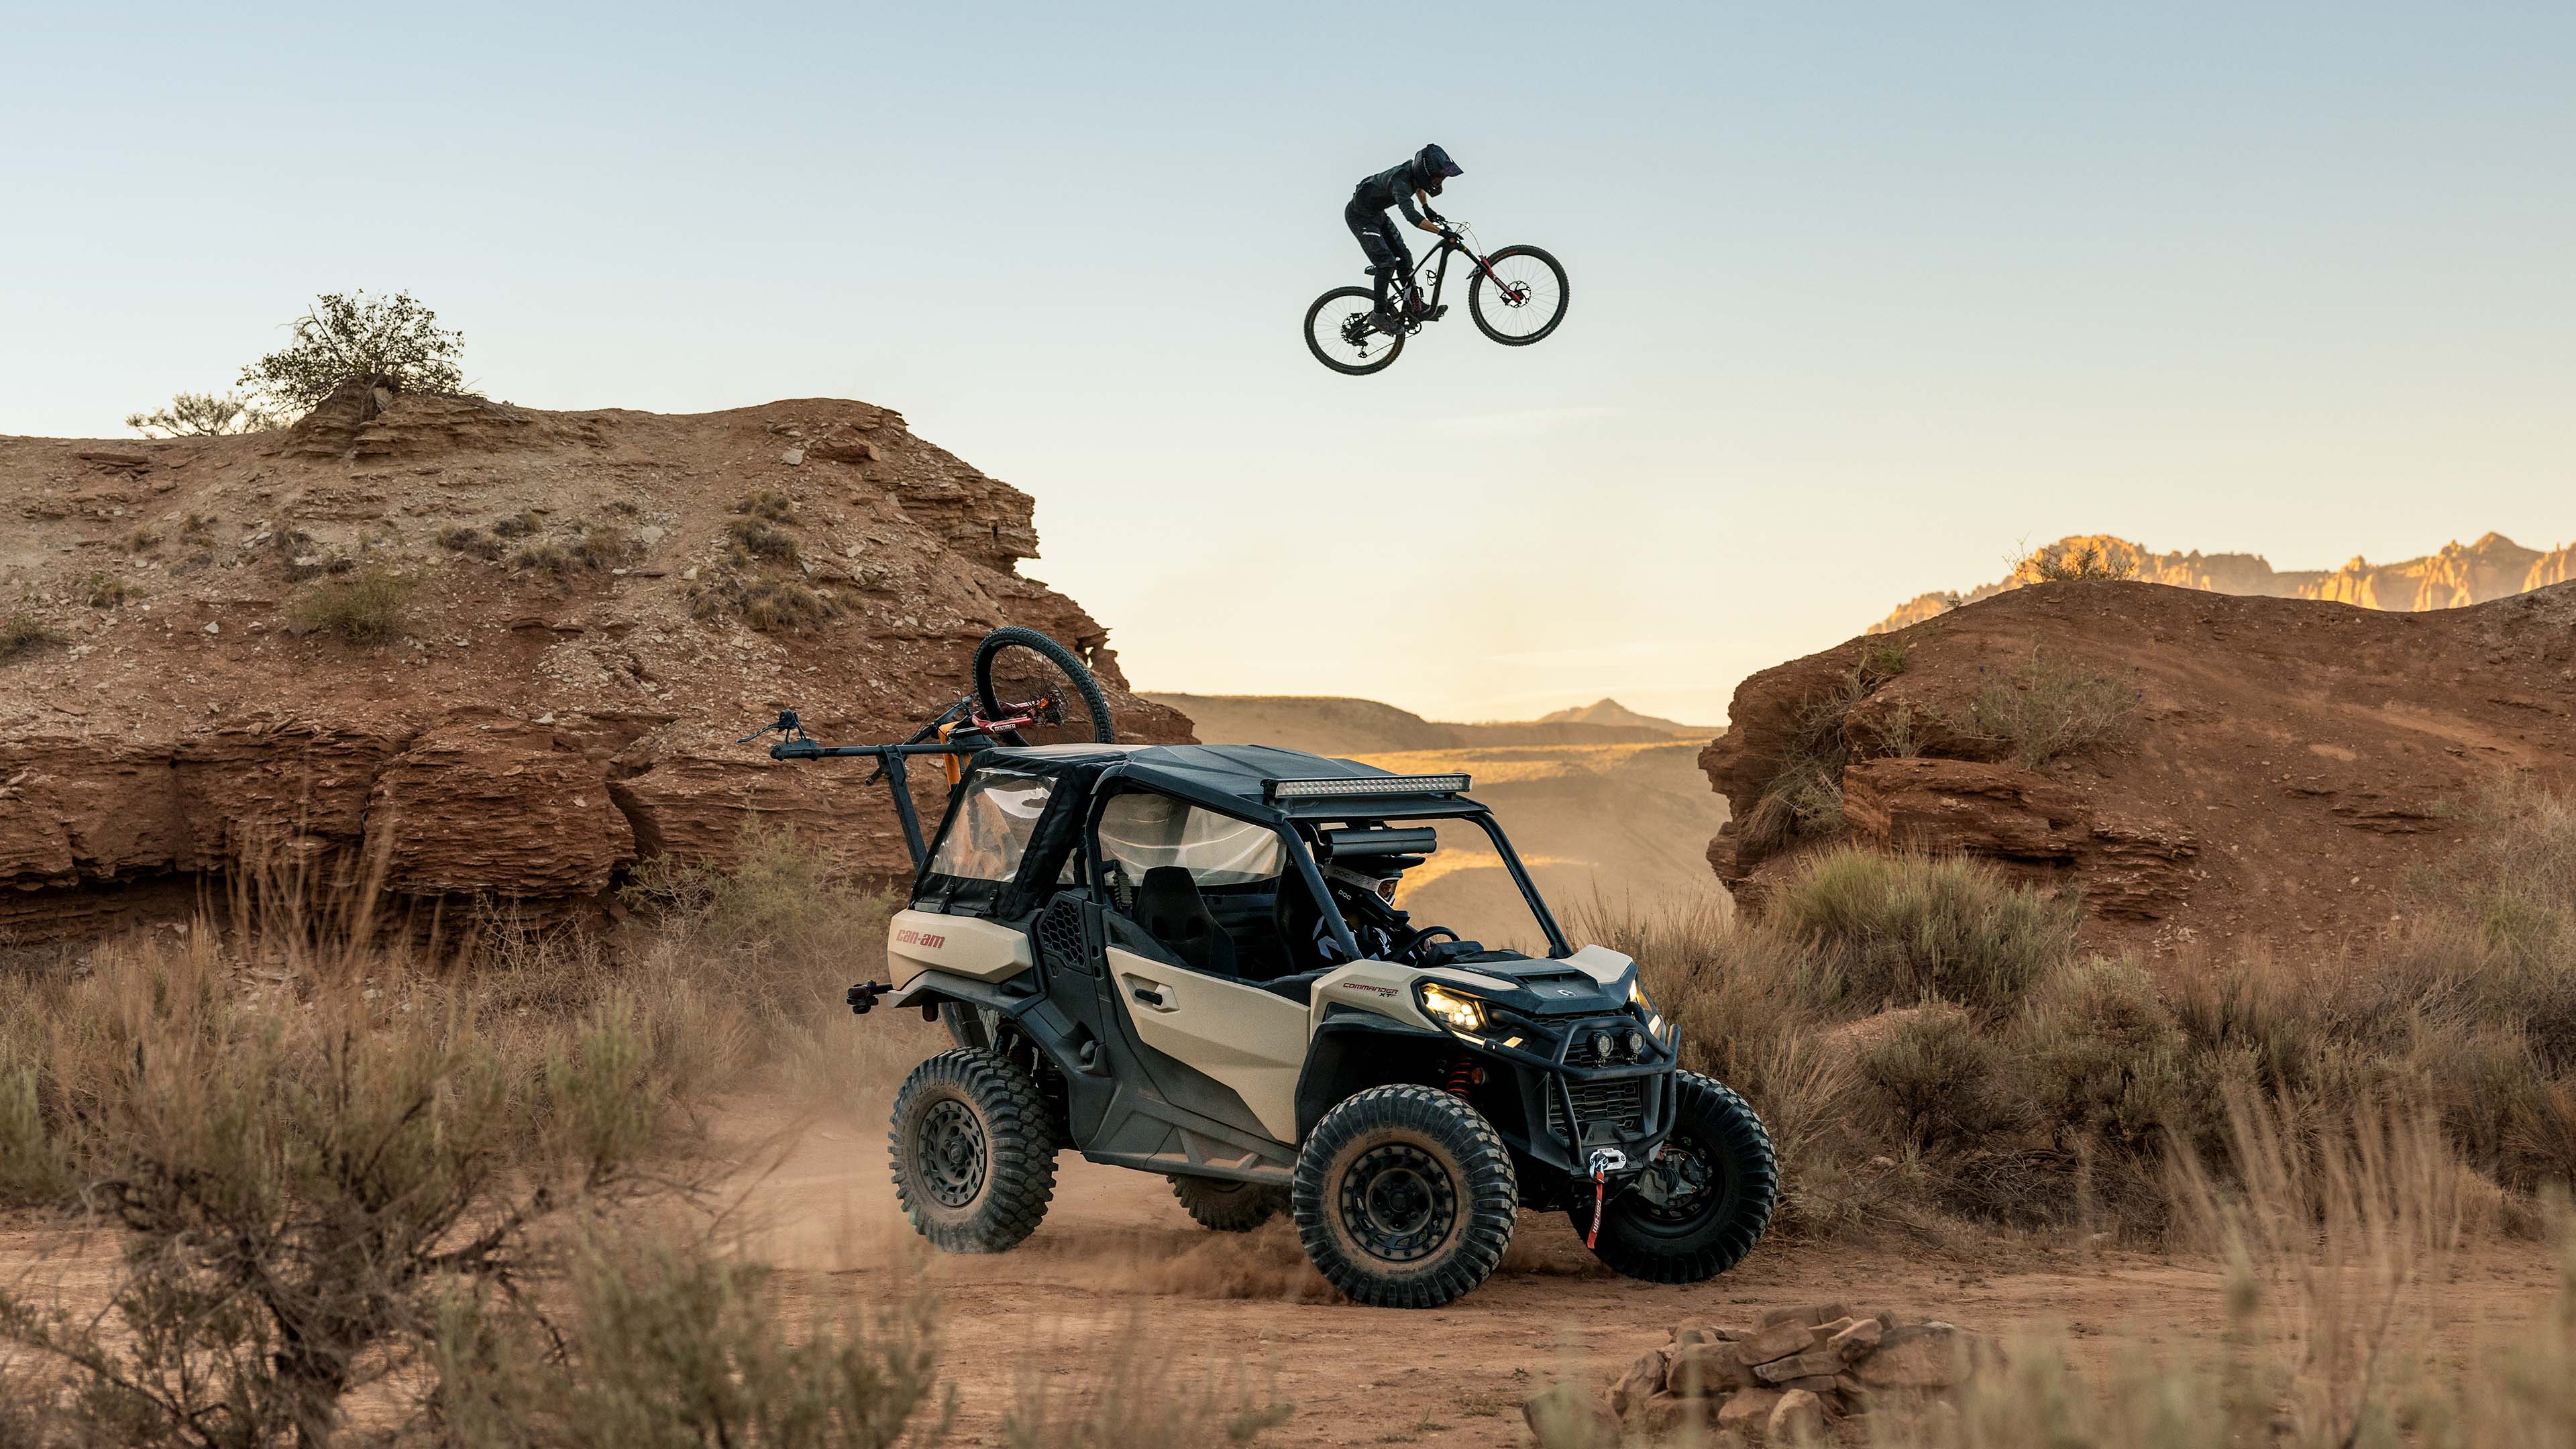 Cyclist jumping over Can-Am side-by-side vehicle